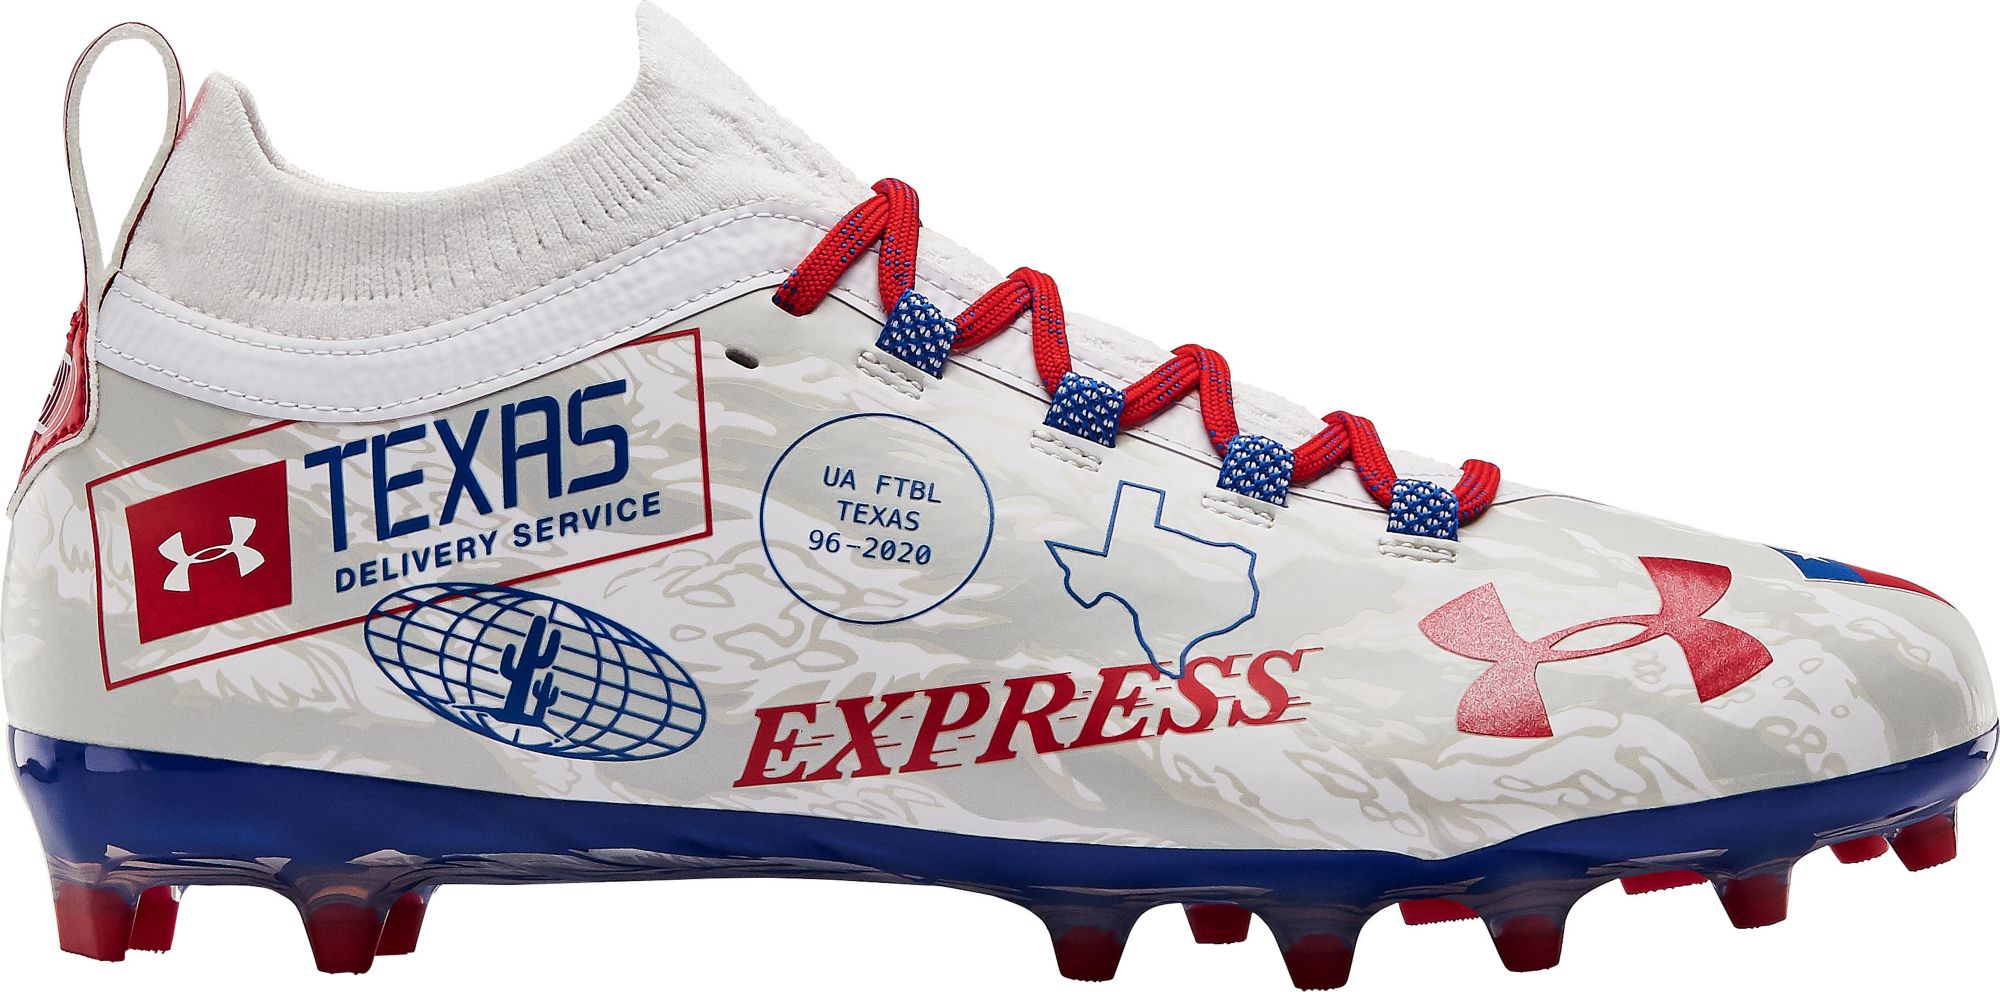 under armour spotlight cleats white